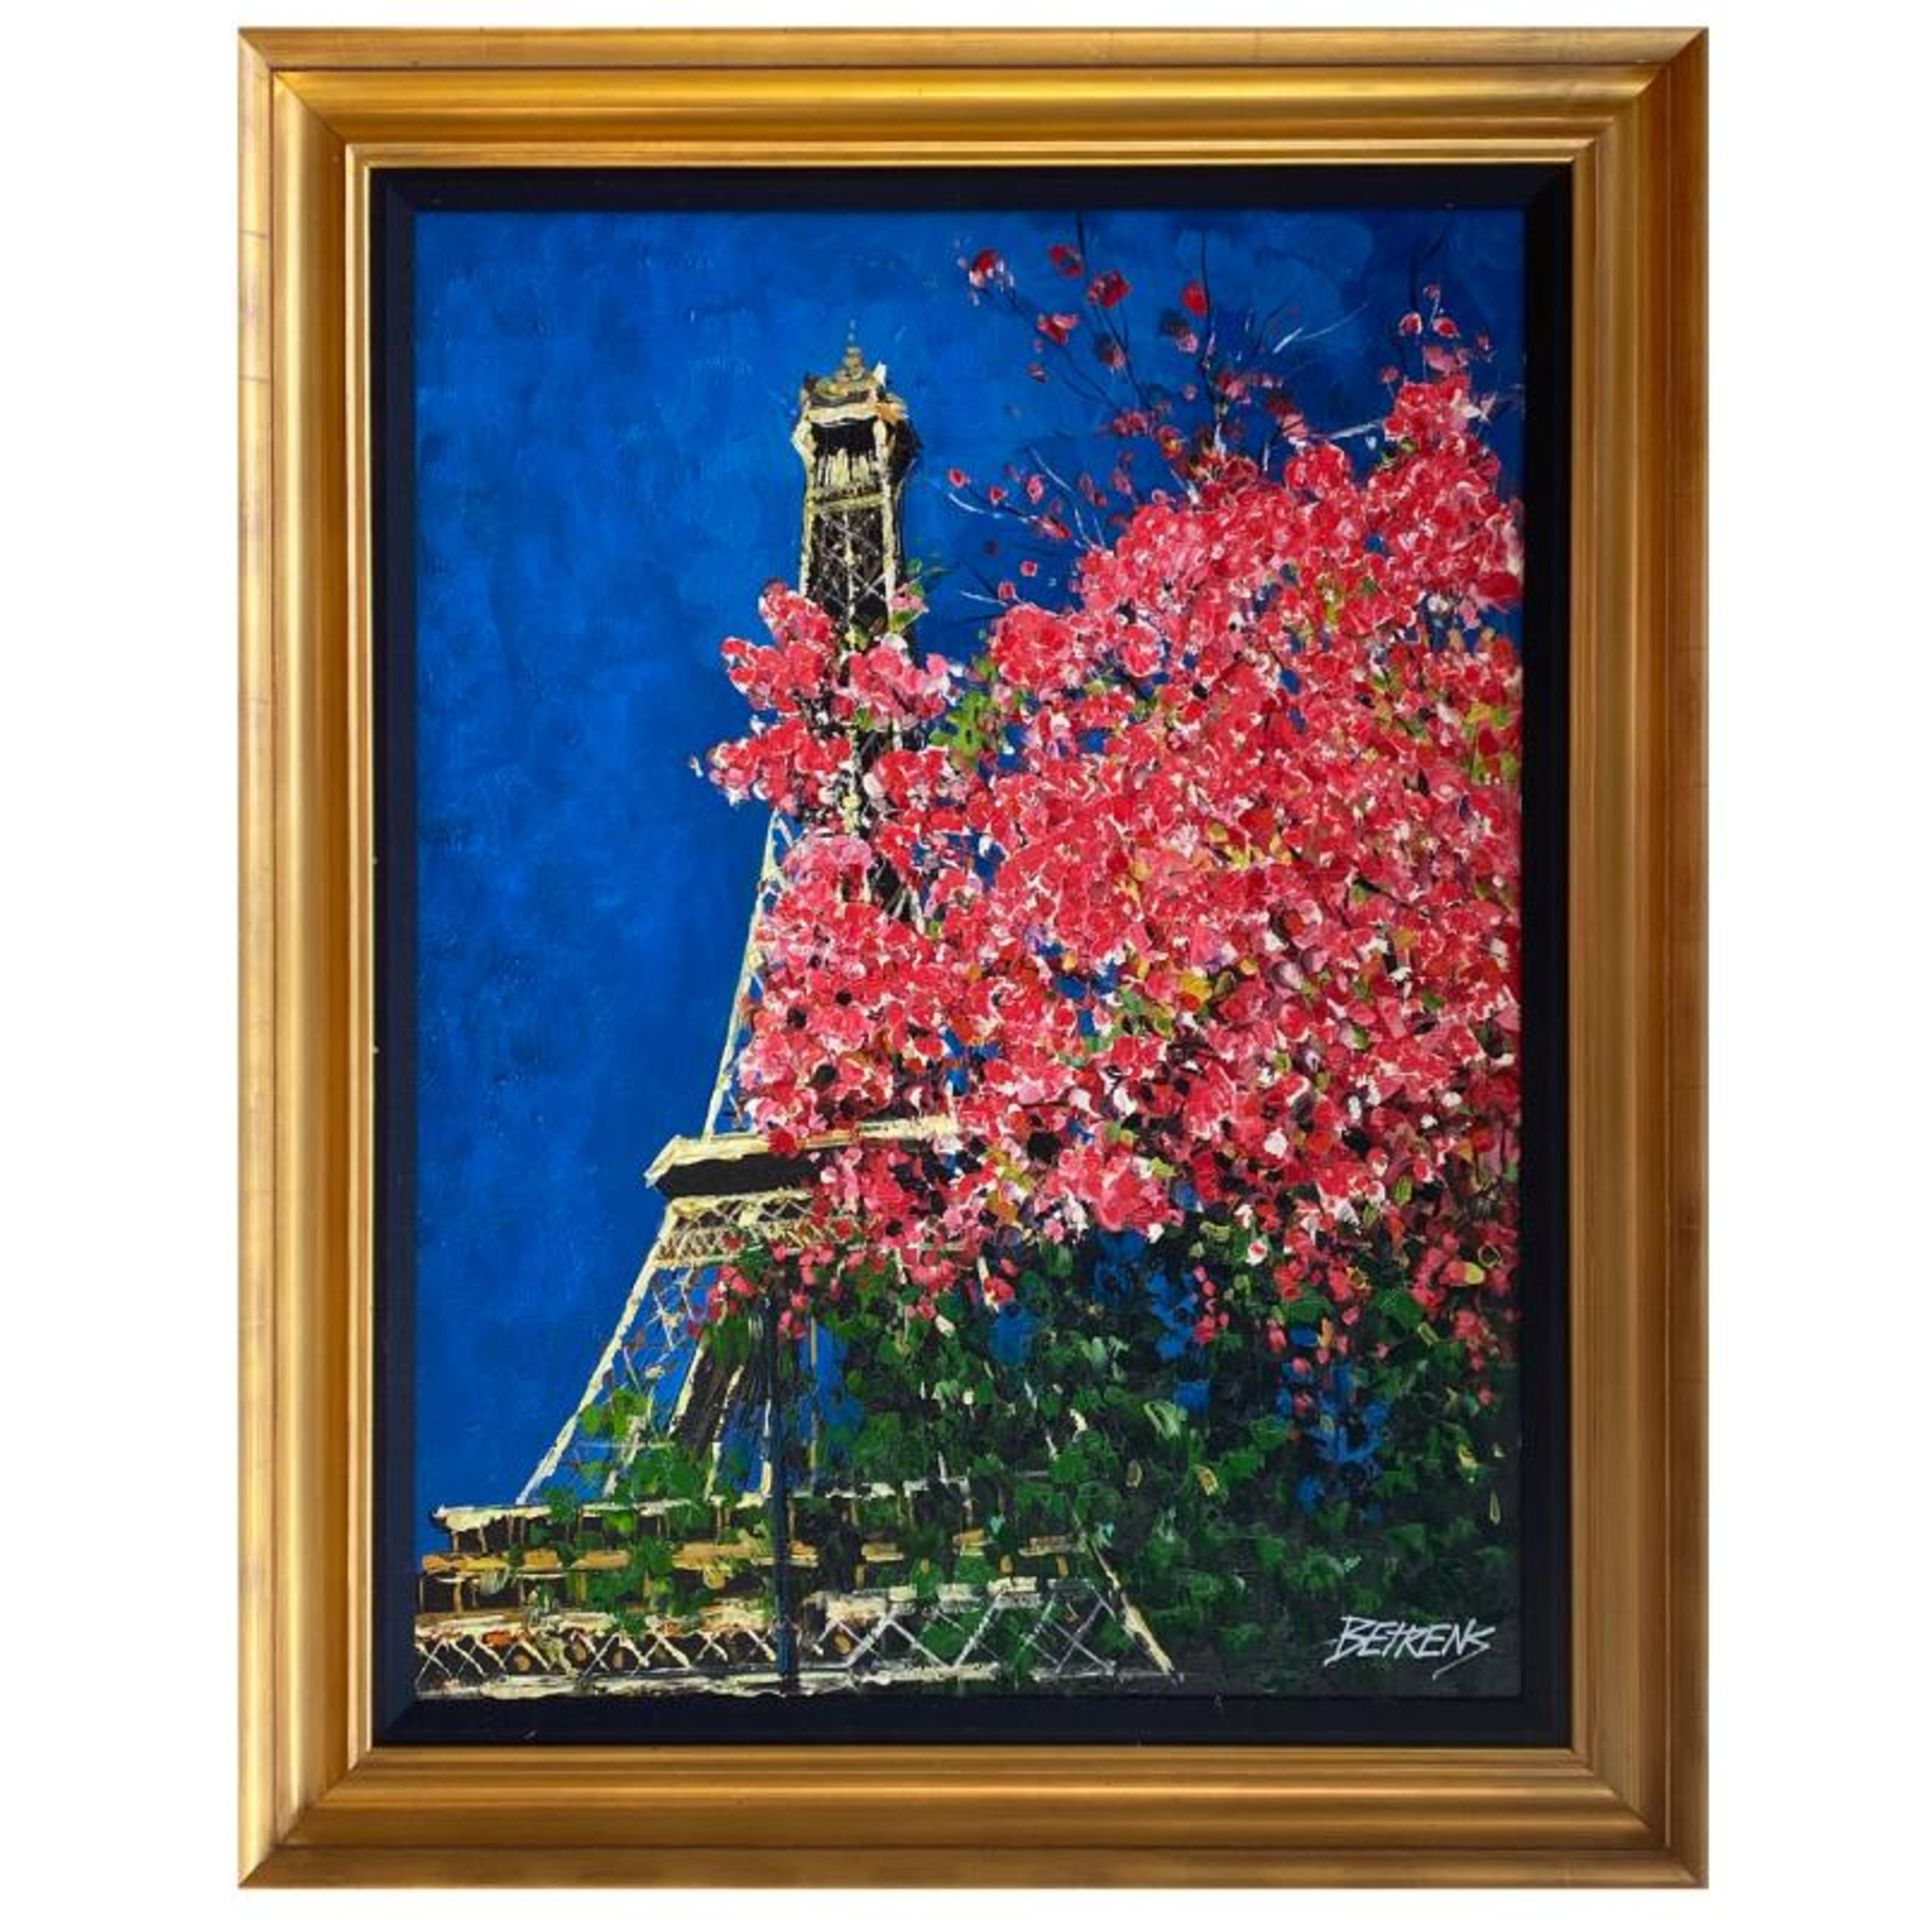 Howard Behrens (1933-2014), "Paris in the Spring" Hand Signed Original Painting